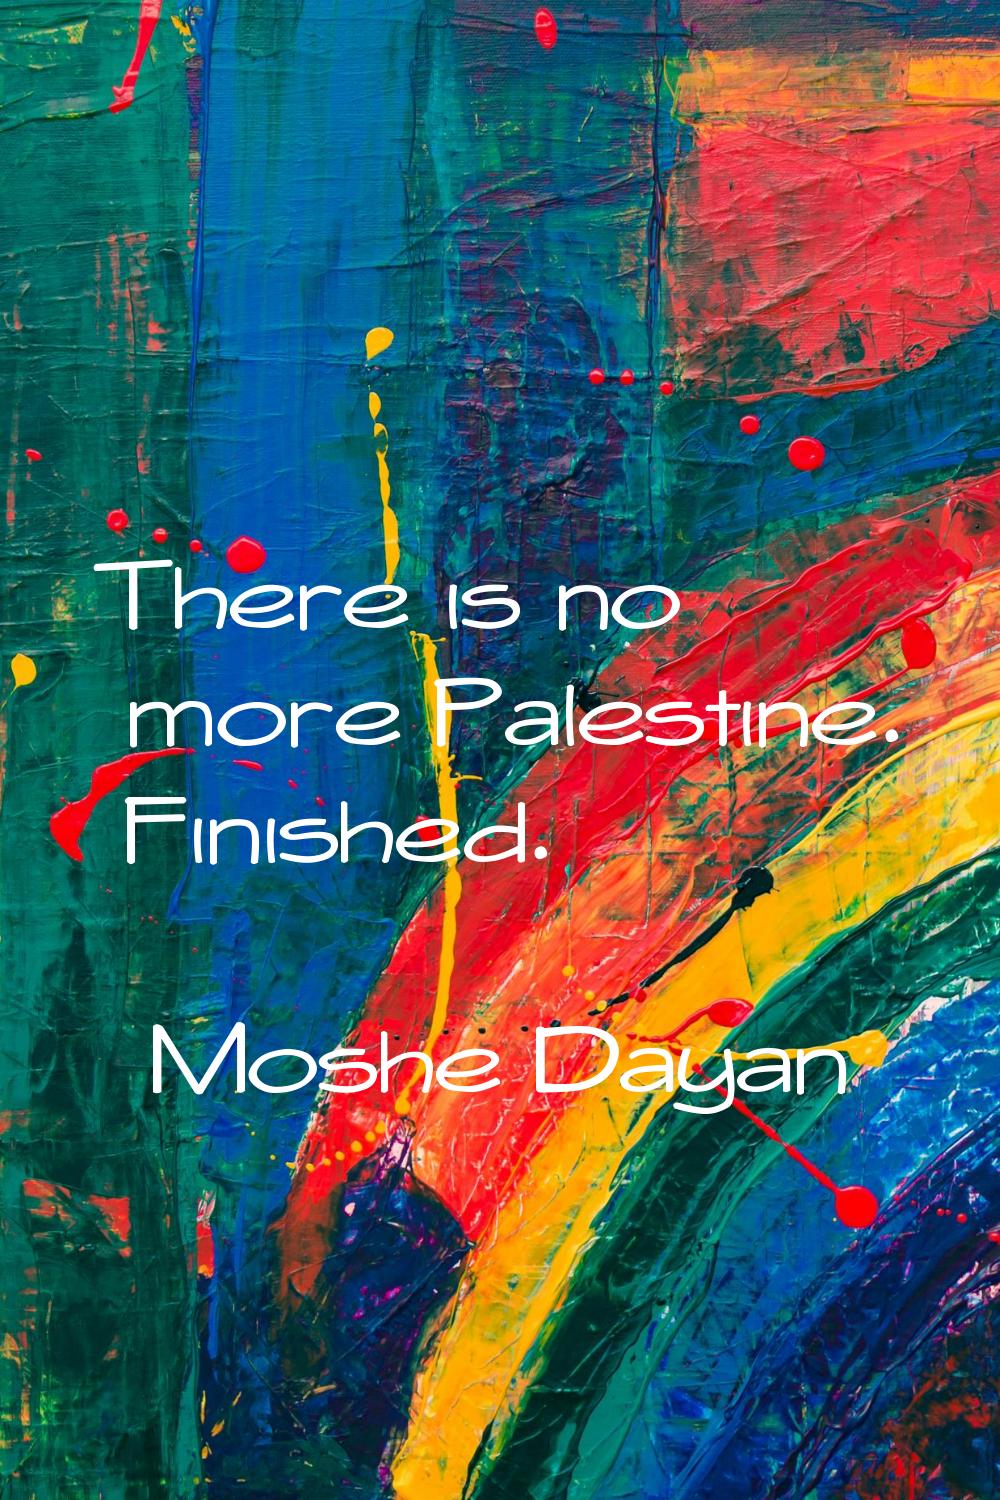 There is no more Palestine. Finished.